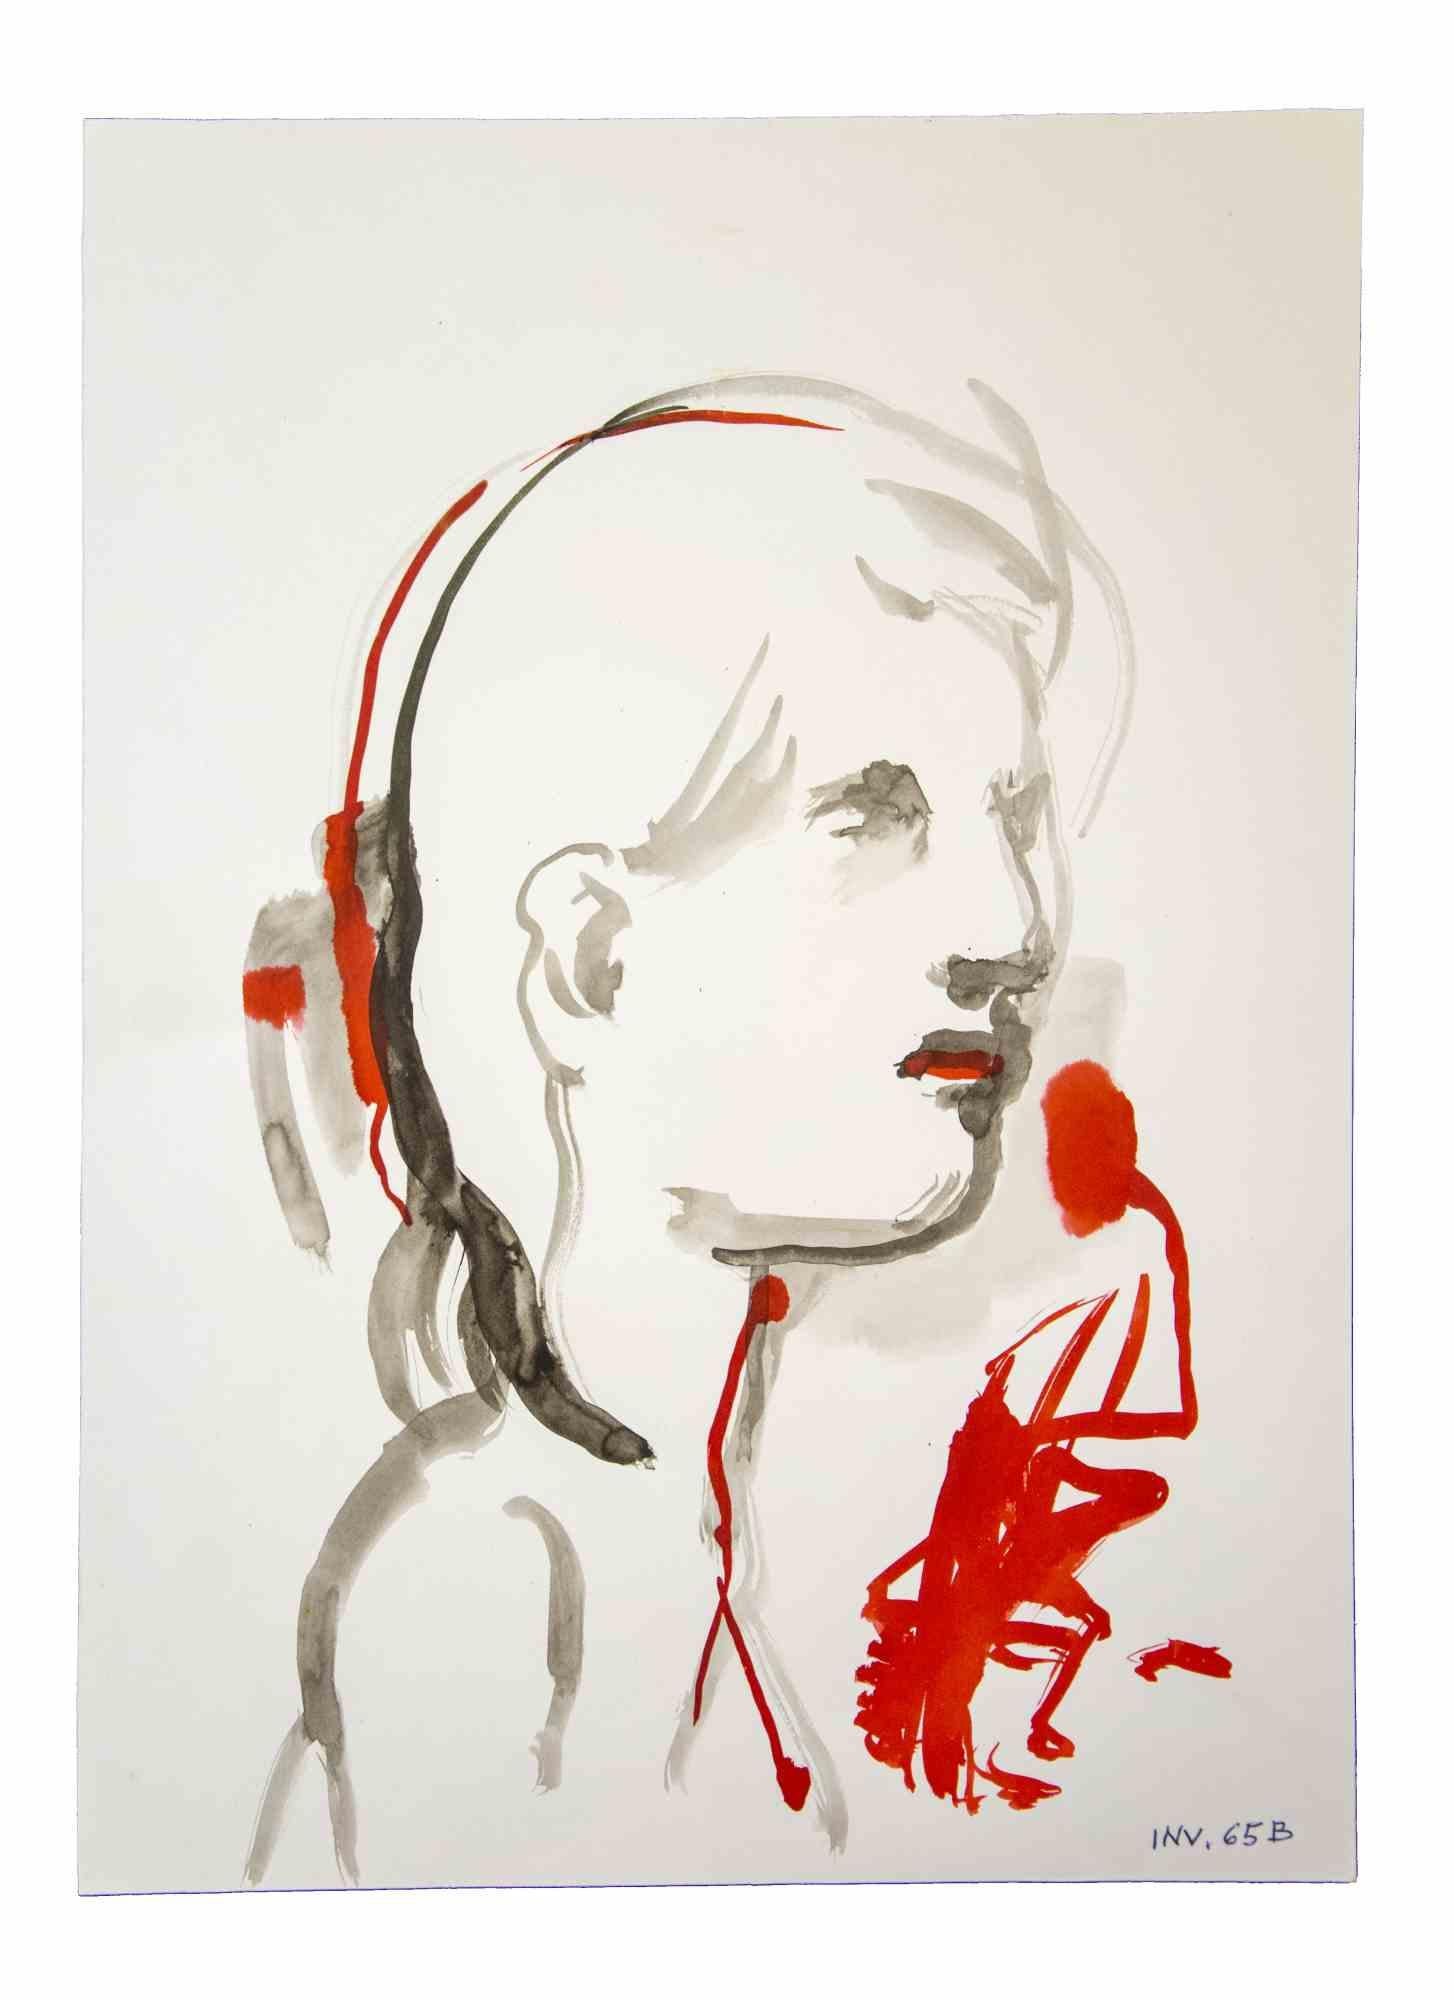 Female Portrait is an original artwork realized in the 1970s by the Italian Contemporary artist  Leo Guida  (1992 - 2017).

Original drawings in Watercolor on paper.

Good conditions but aged.

The artwork is depicted through strong strokes in